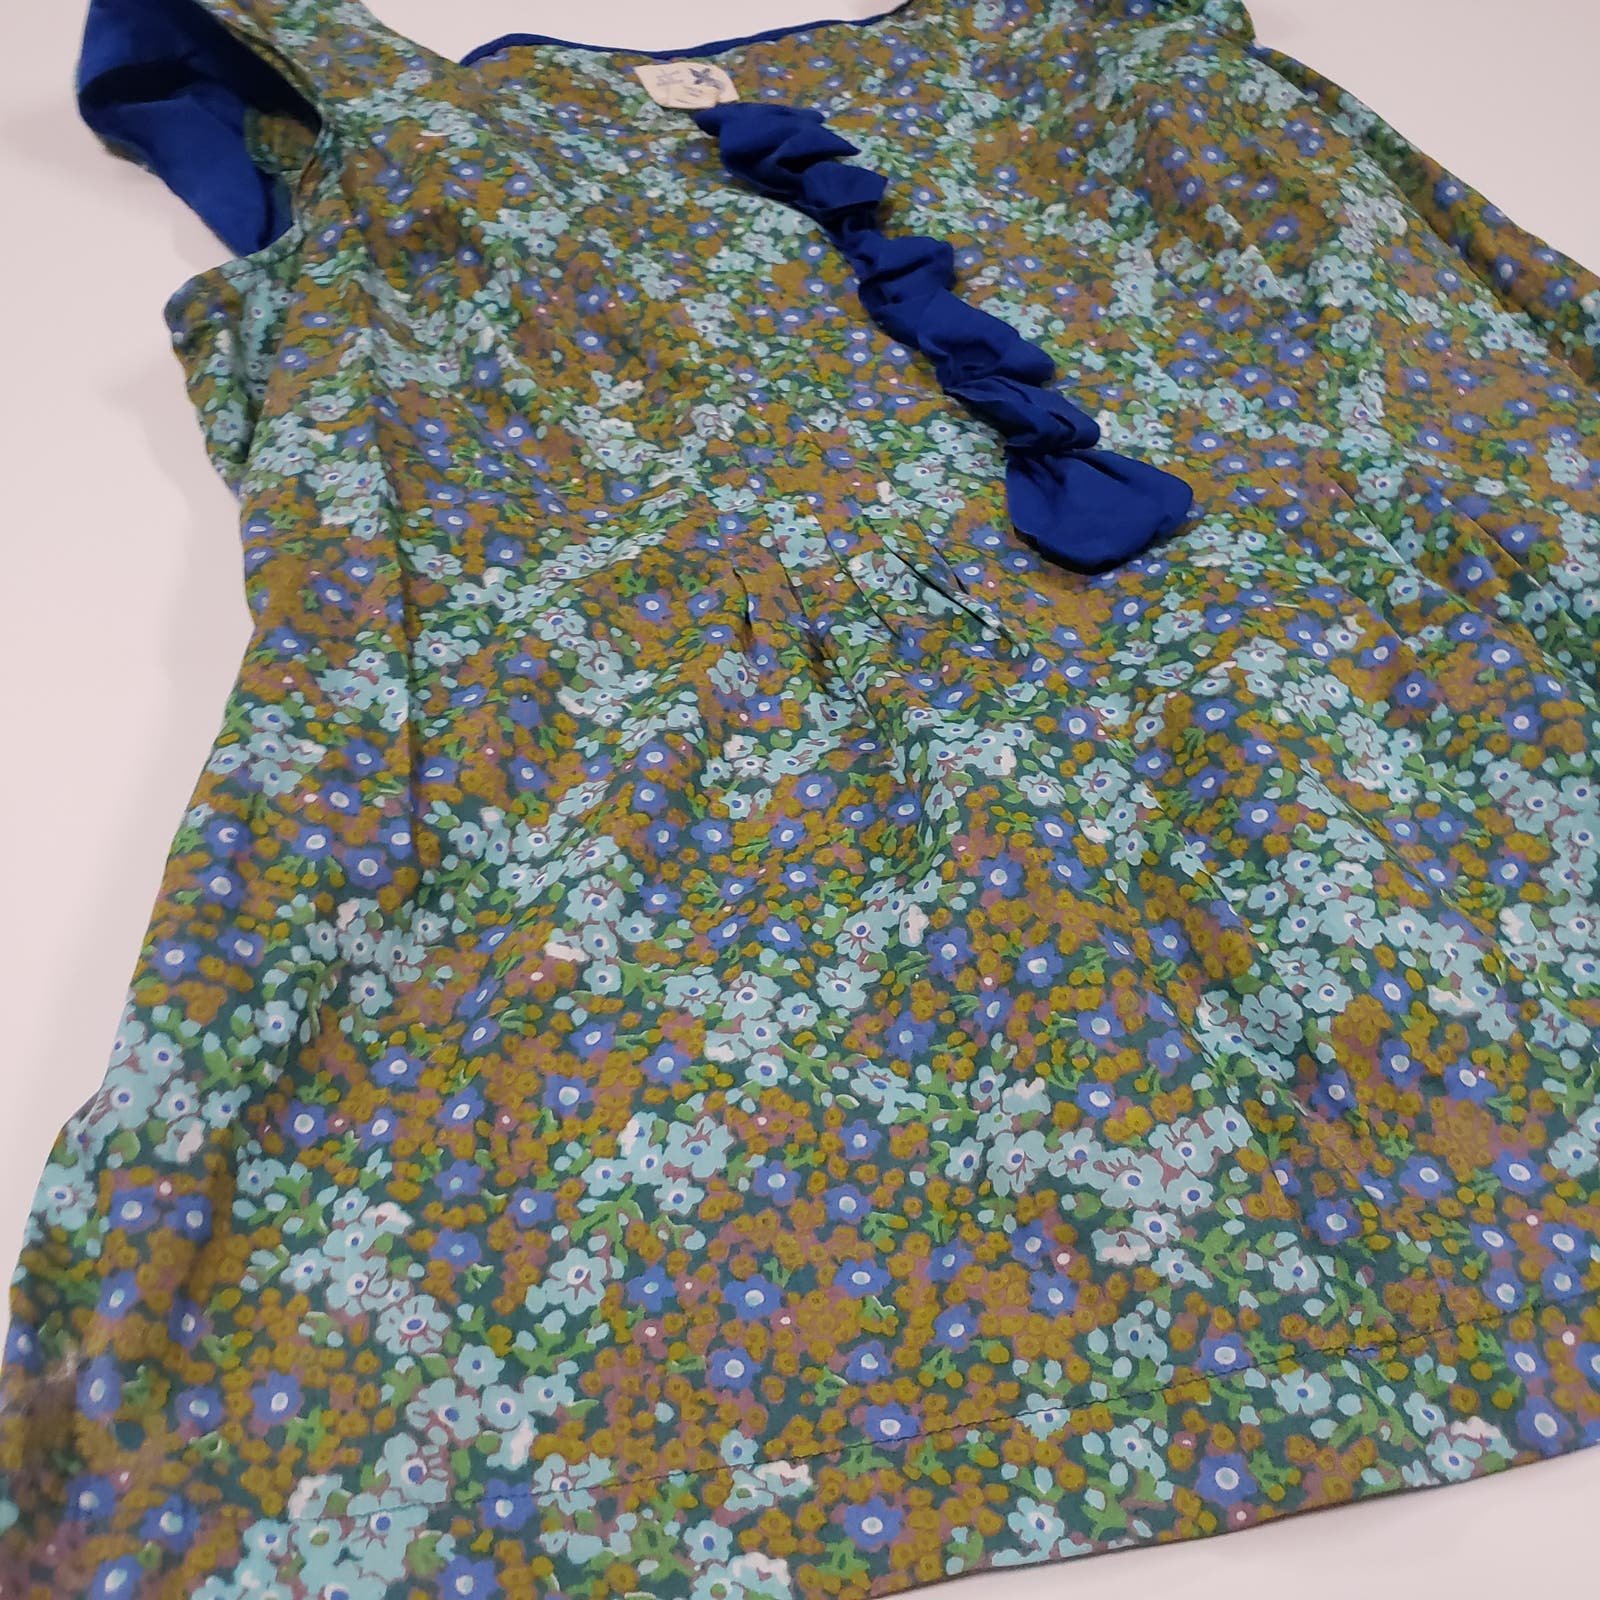 where to buy  Anthropologie Edme & Esylette floral top ladies size 4 nVWSSKV2v no tax